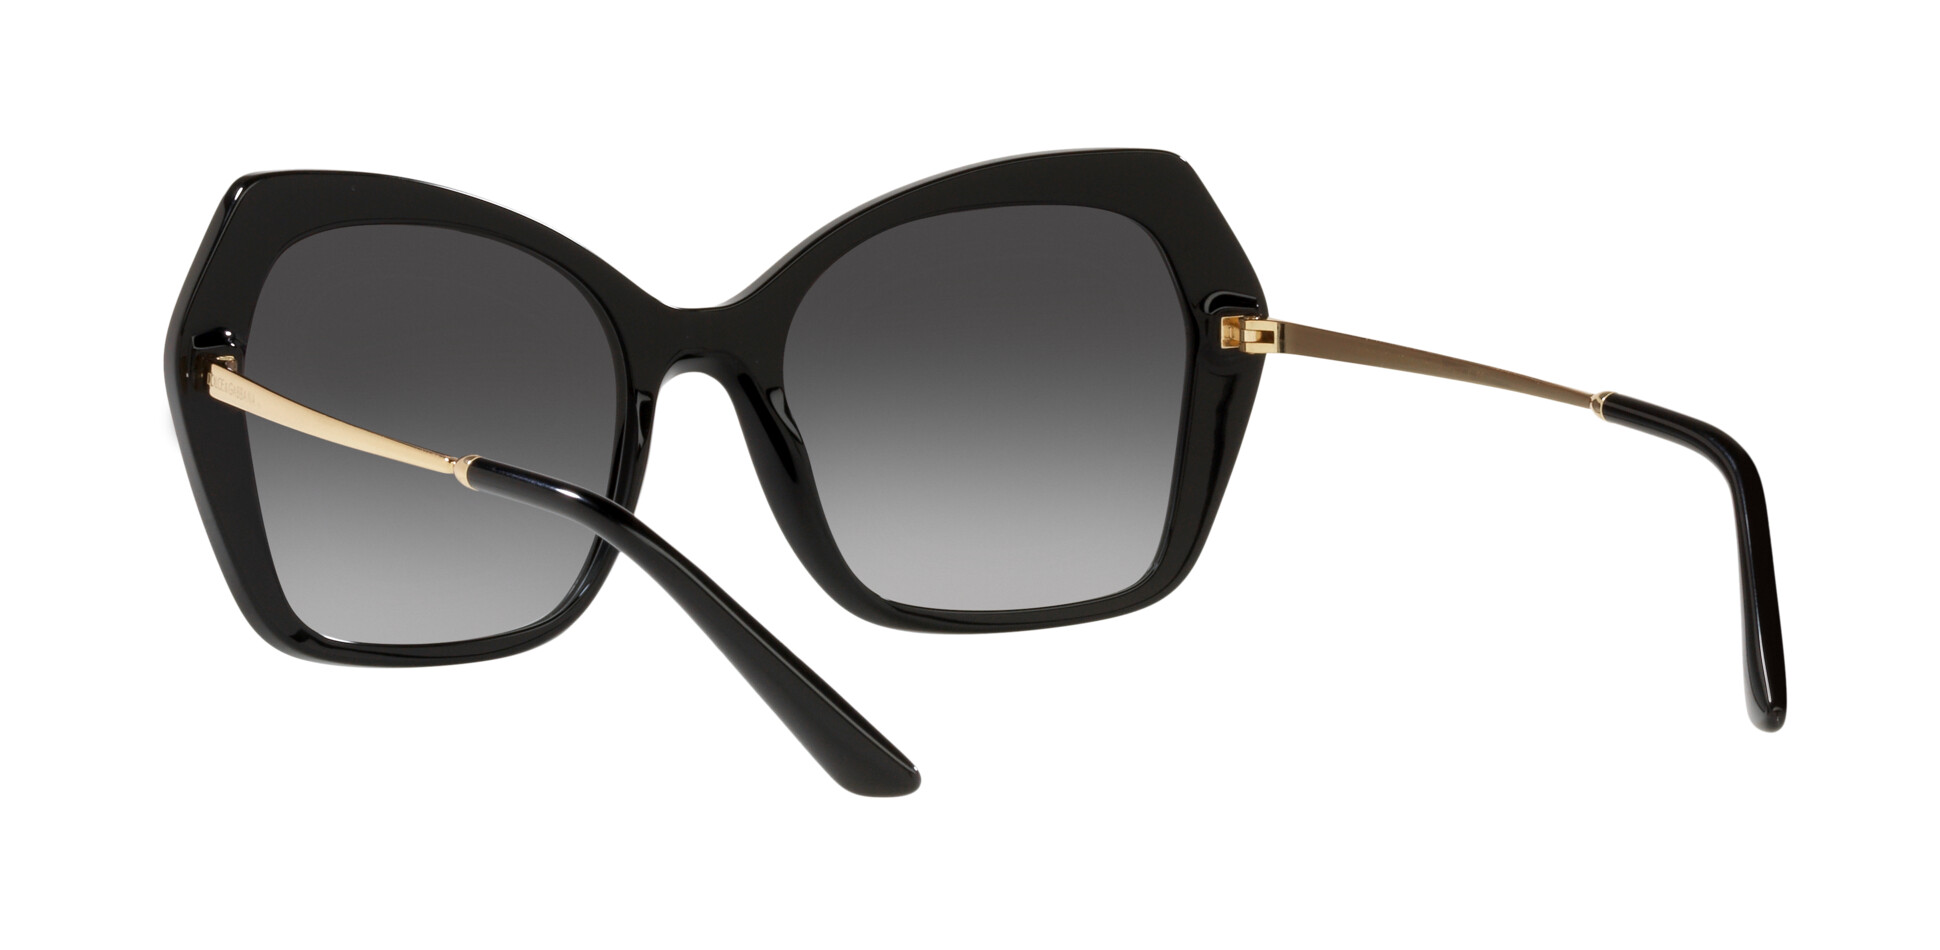 [products.image.folded] Dolce&Gabbana 0DG4399 501/8G Sonnenbrille